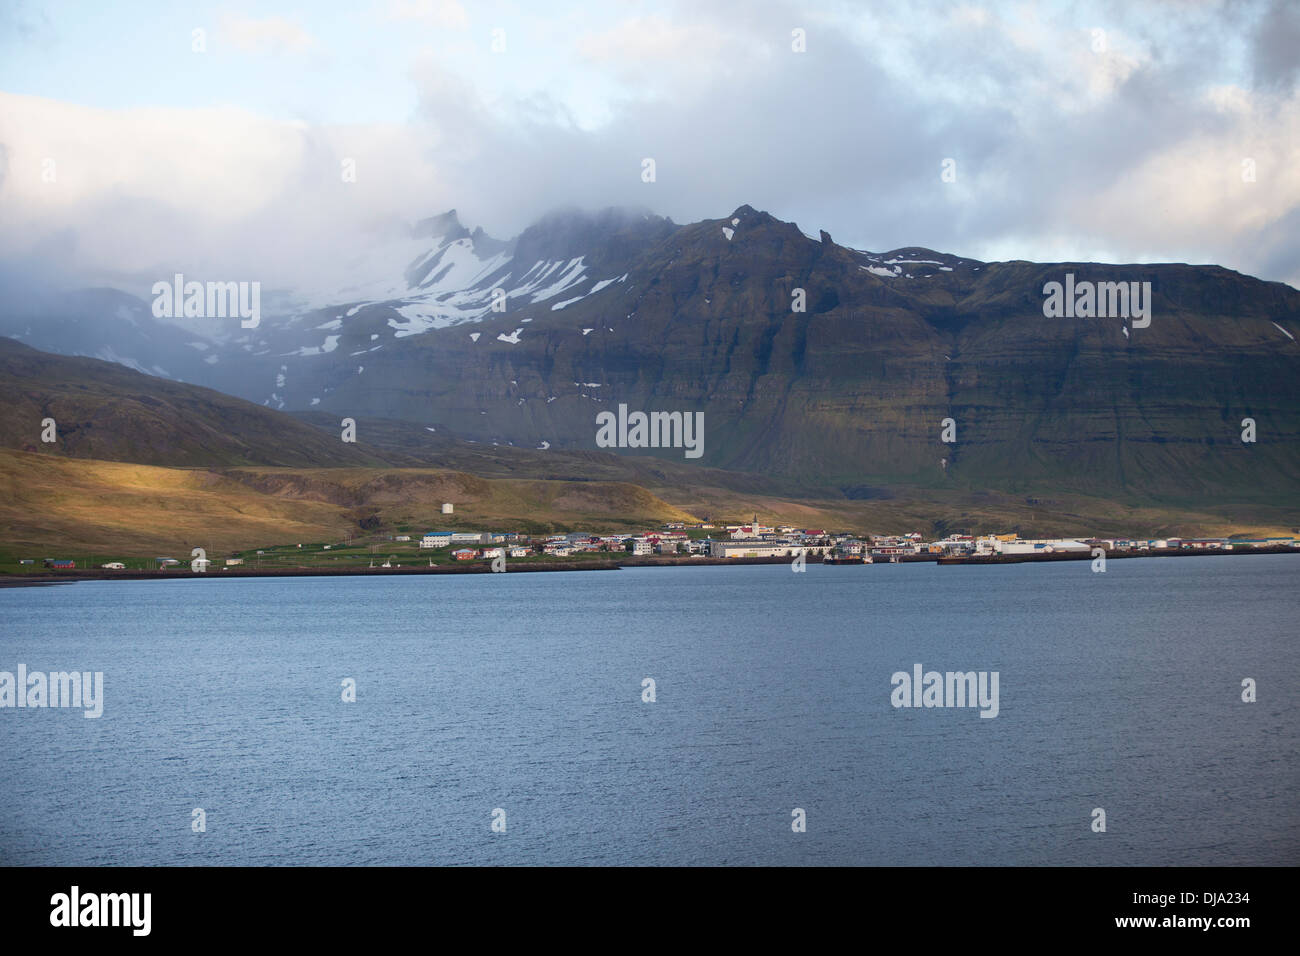 View of a large city in Iceland with cloud-covered mountain behind Stock Photo